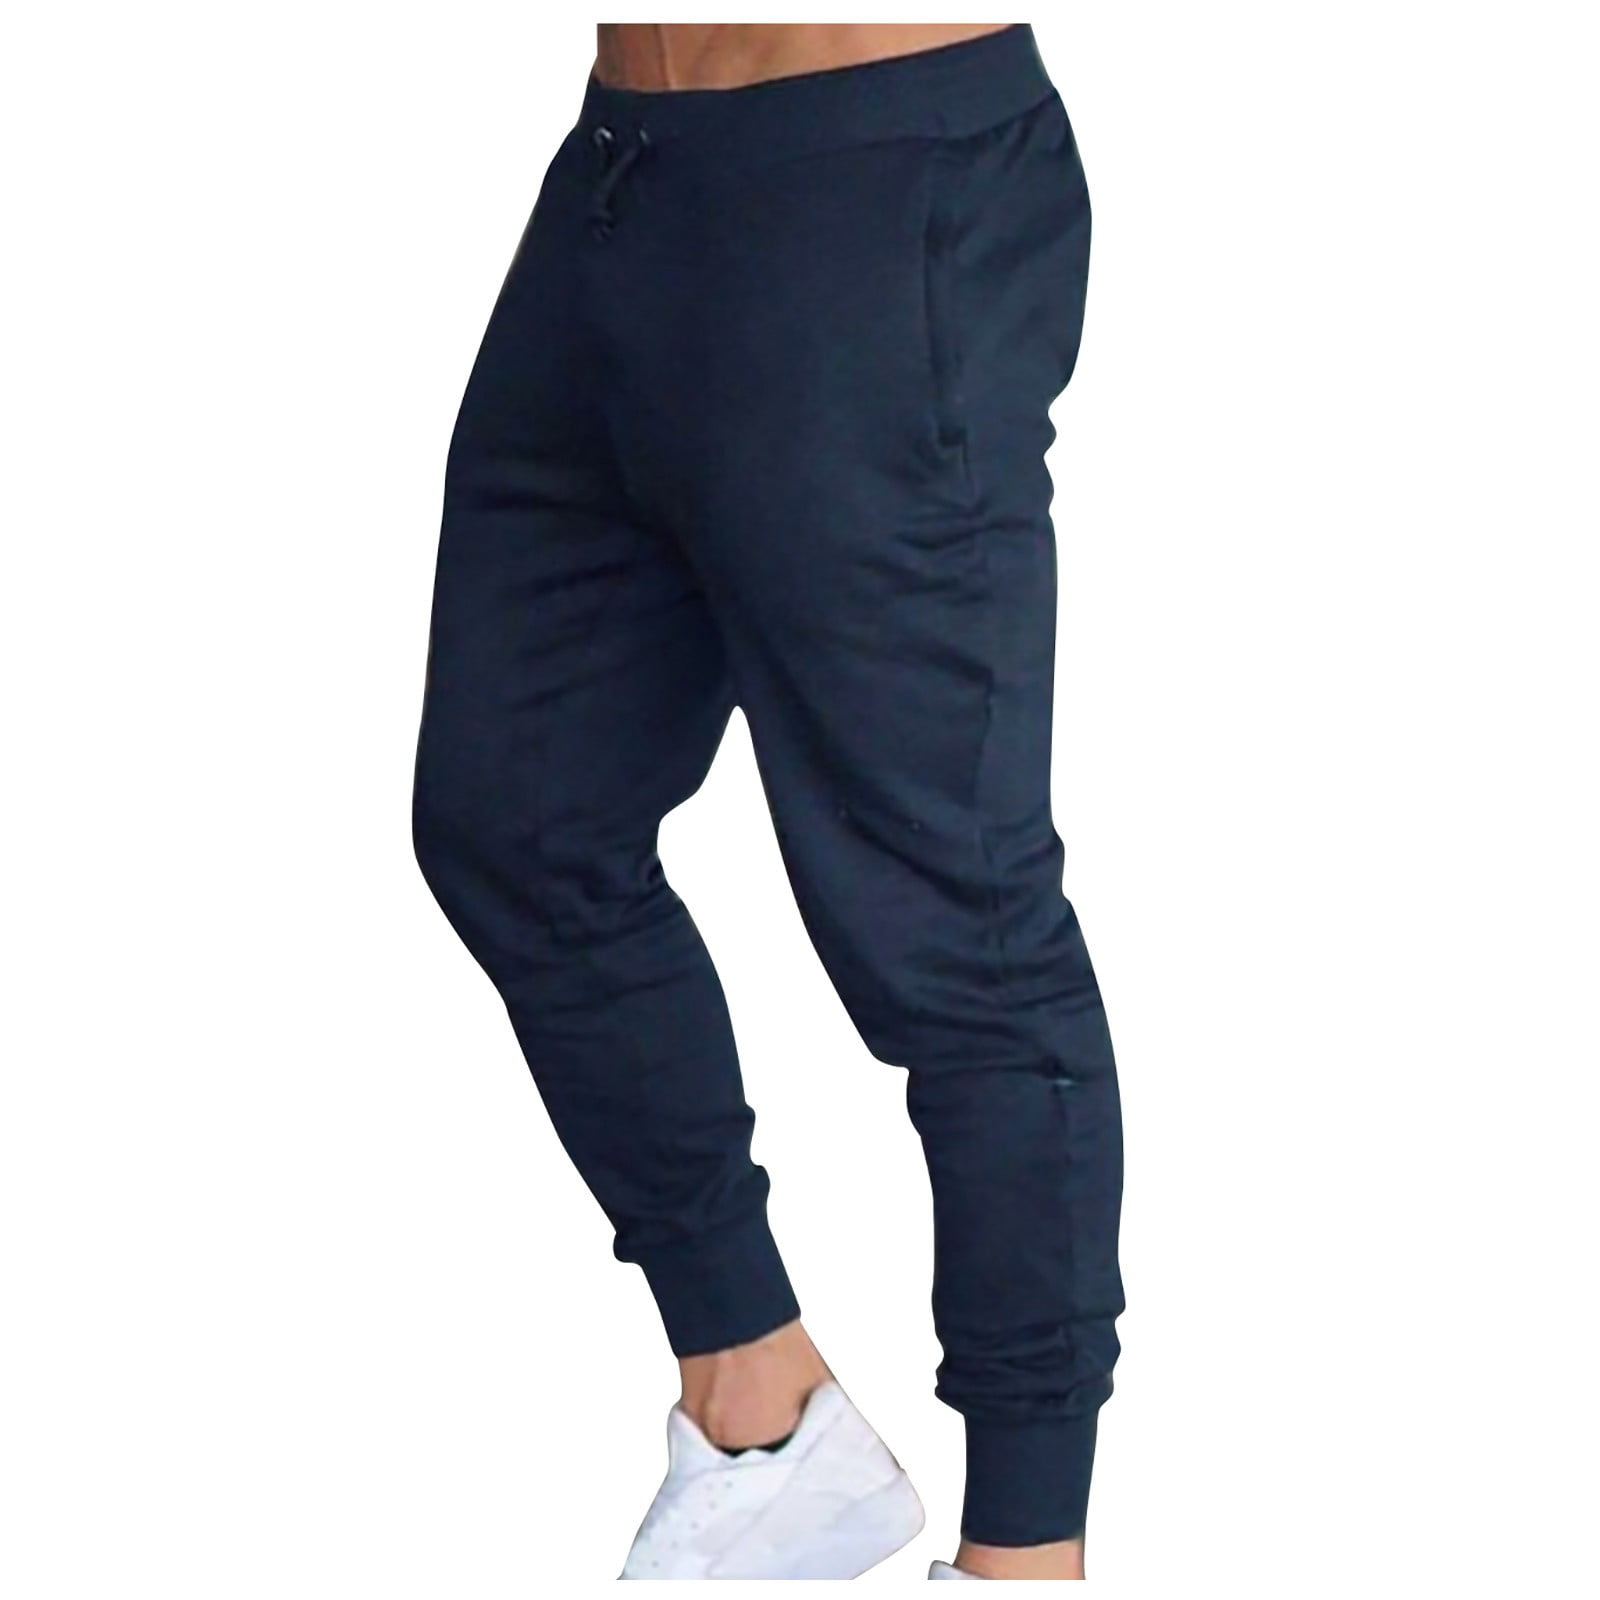 Clearance Men's Jogger Pants Slim Tapered Athletic Sweatpants for ...